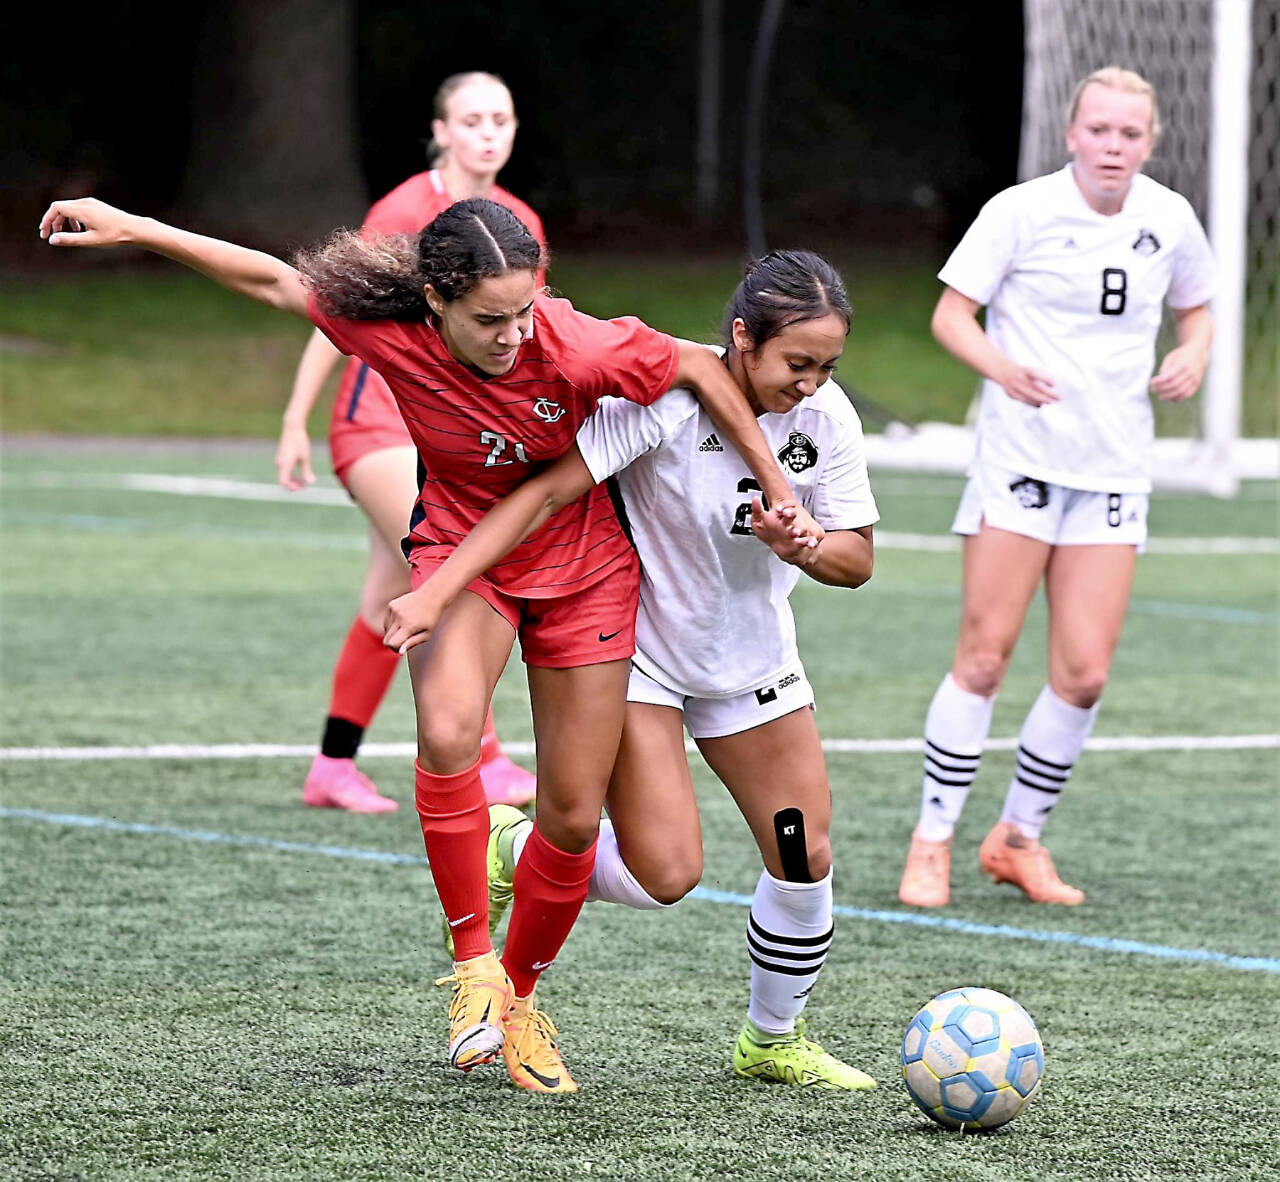 Peninsula College’s Briana-Jean Tanaka (2) battles with Lower Columbia’s Nataija Blaylock (21) for the ball in an NWAC Friendly held Tuesday in Tukwila. In the background is Peninsula College’s Anna Petty. Tanaka and Petty each scored two goals as Peninsula won 8-1. (Rick Ross/Peninsula College)